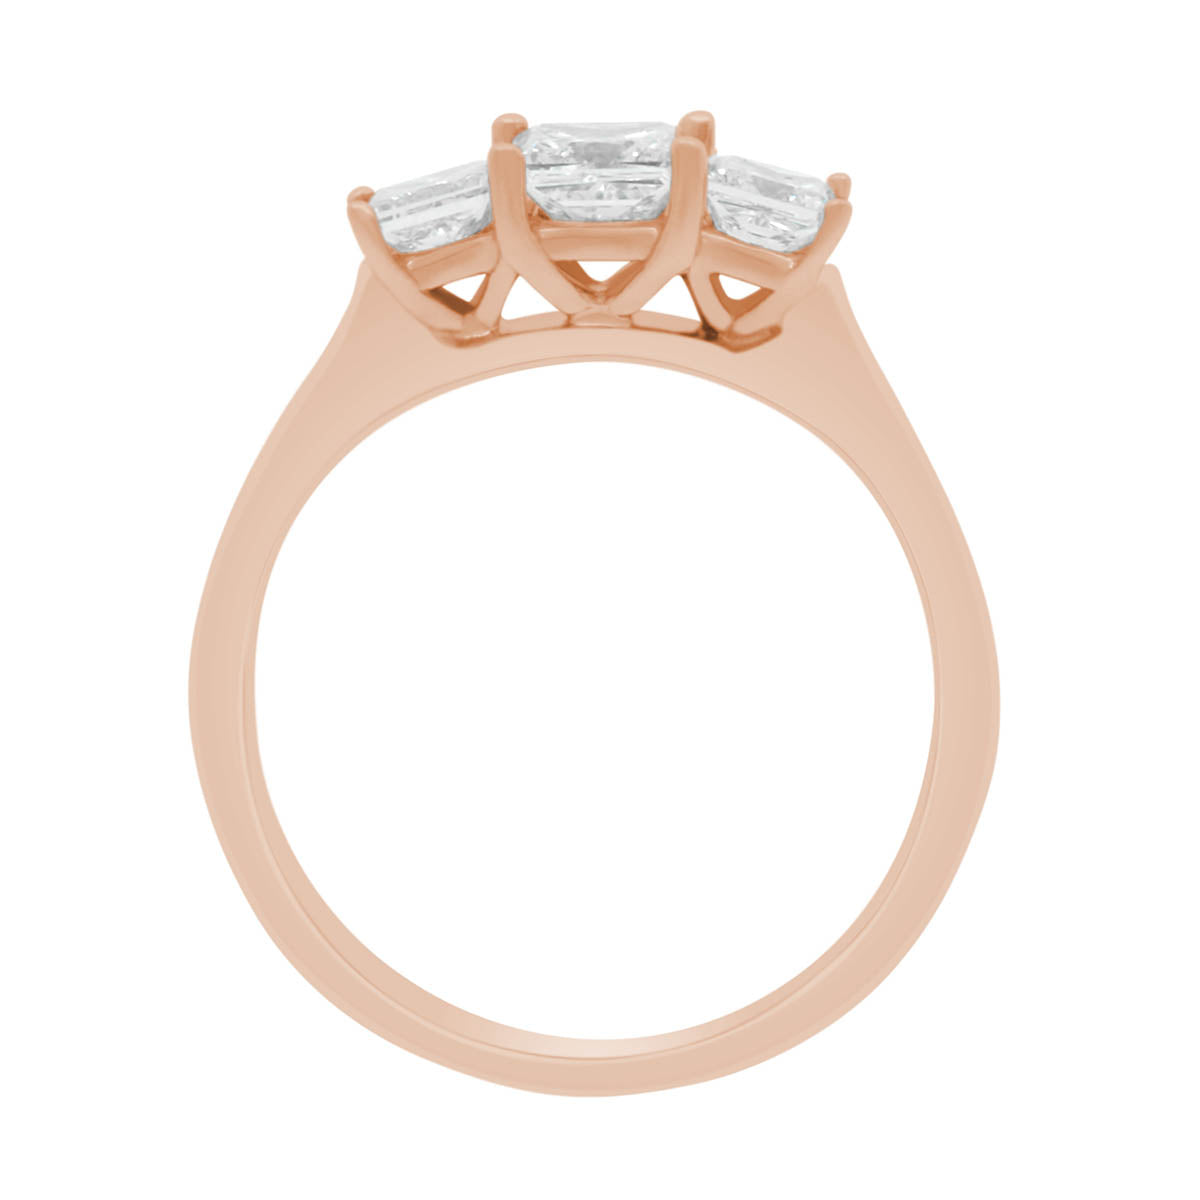 Princess Cut Trilogy Engagement Ring in rose gold  standing upright